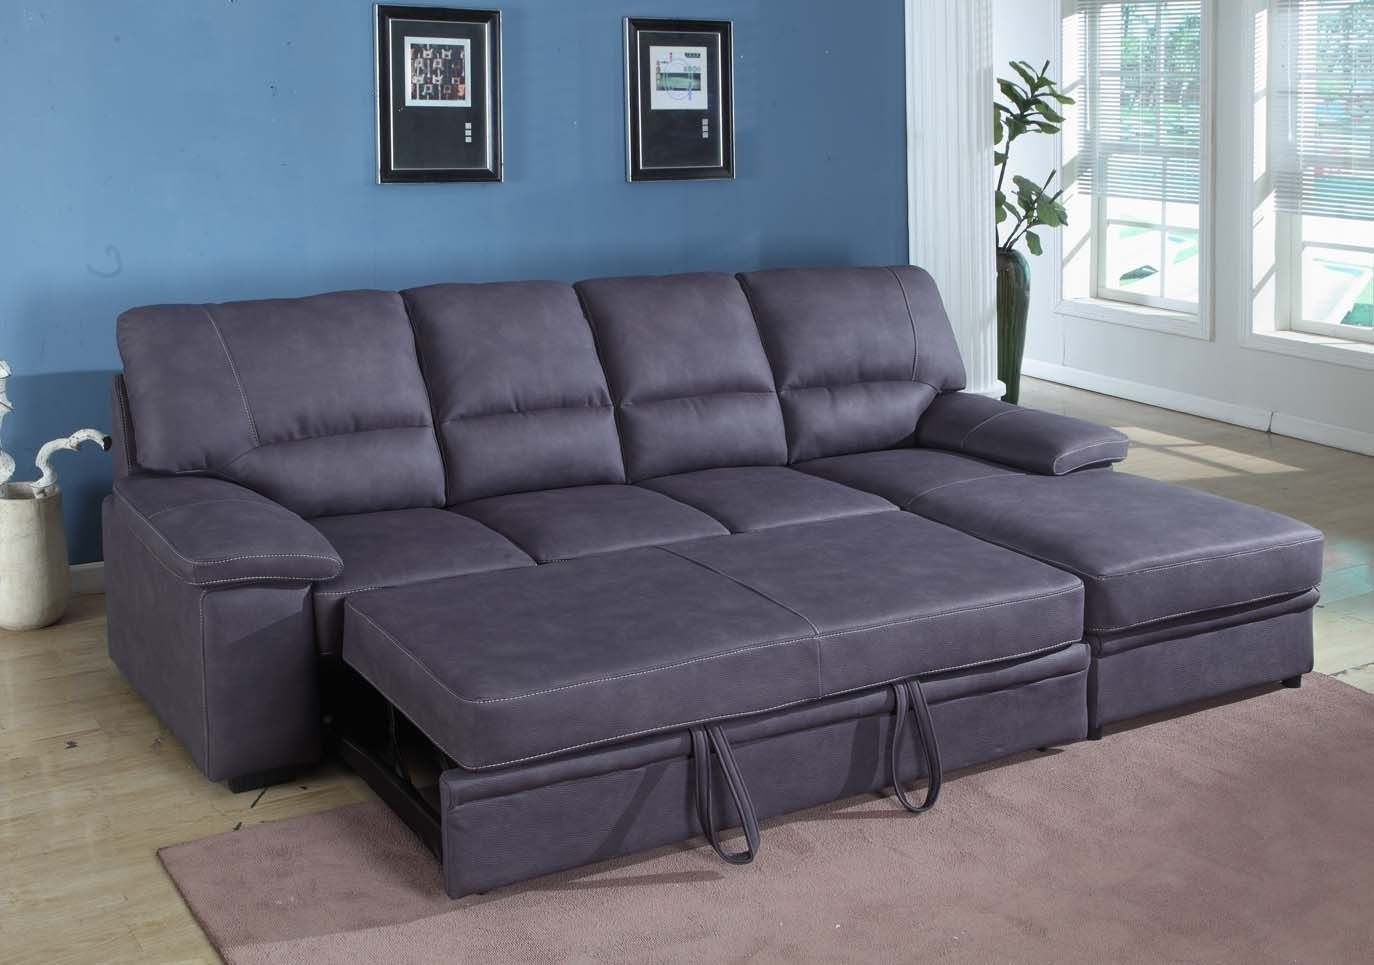 Furniture Sectional Sofa Queen Sleeper Corner Couch Liverpool With Adjustable Sectional Sofas With Queen Bed 